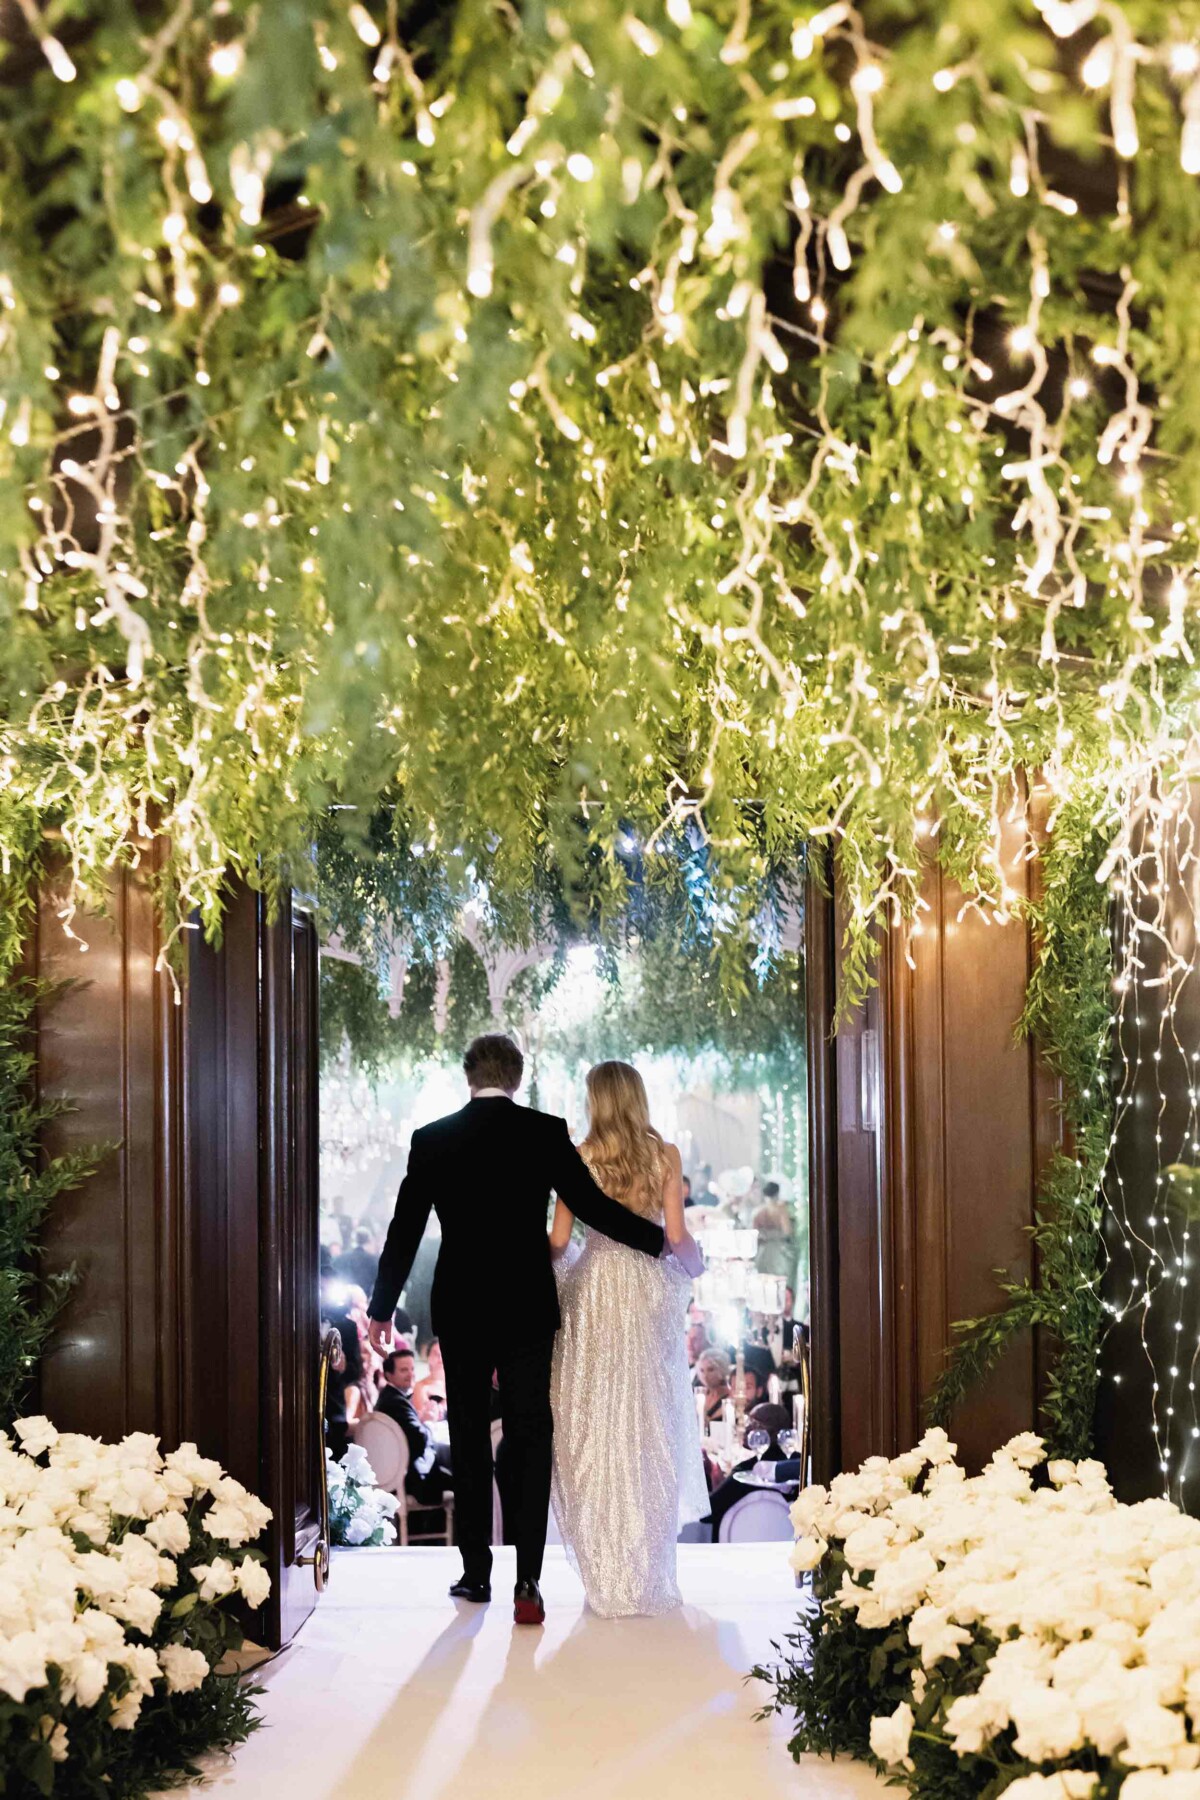 A married couple walking down a grand hallway 